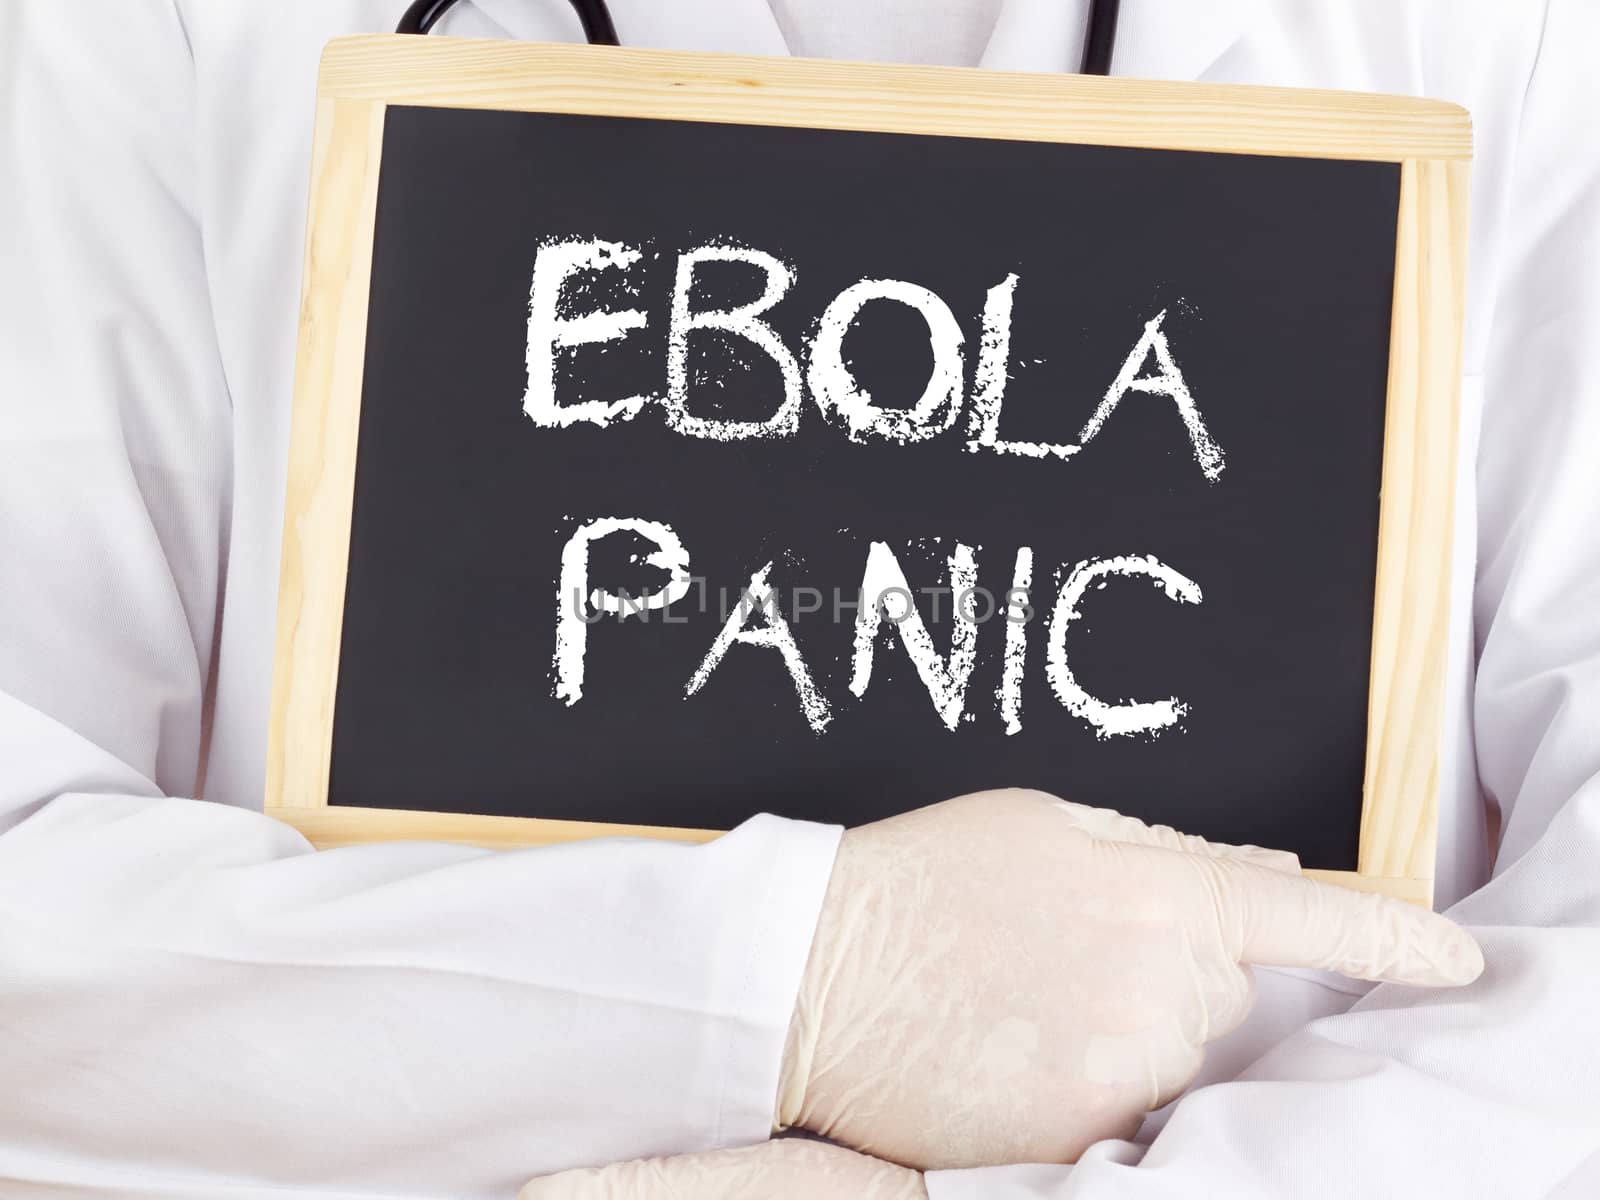 Doctor shows information: Ebola panic by gwolters